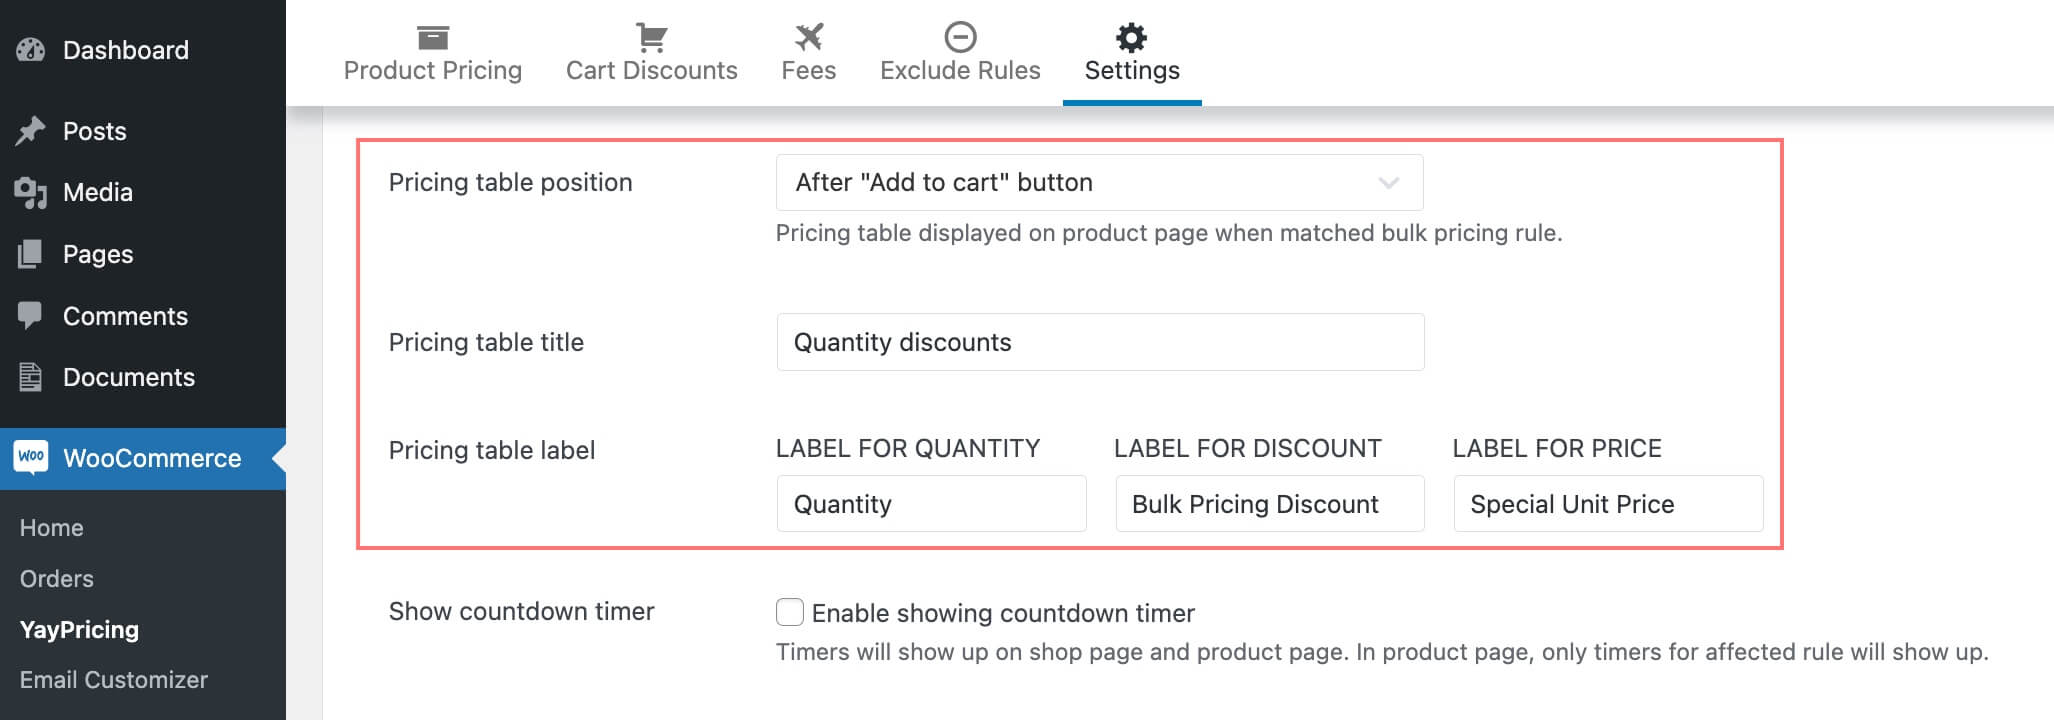 WooCommerce dynamic pricing settings for pricing table display